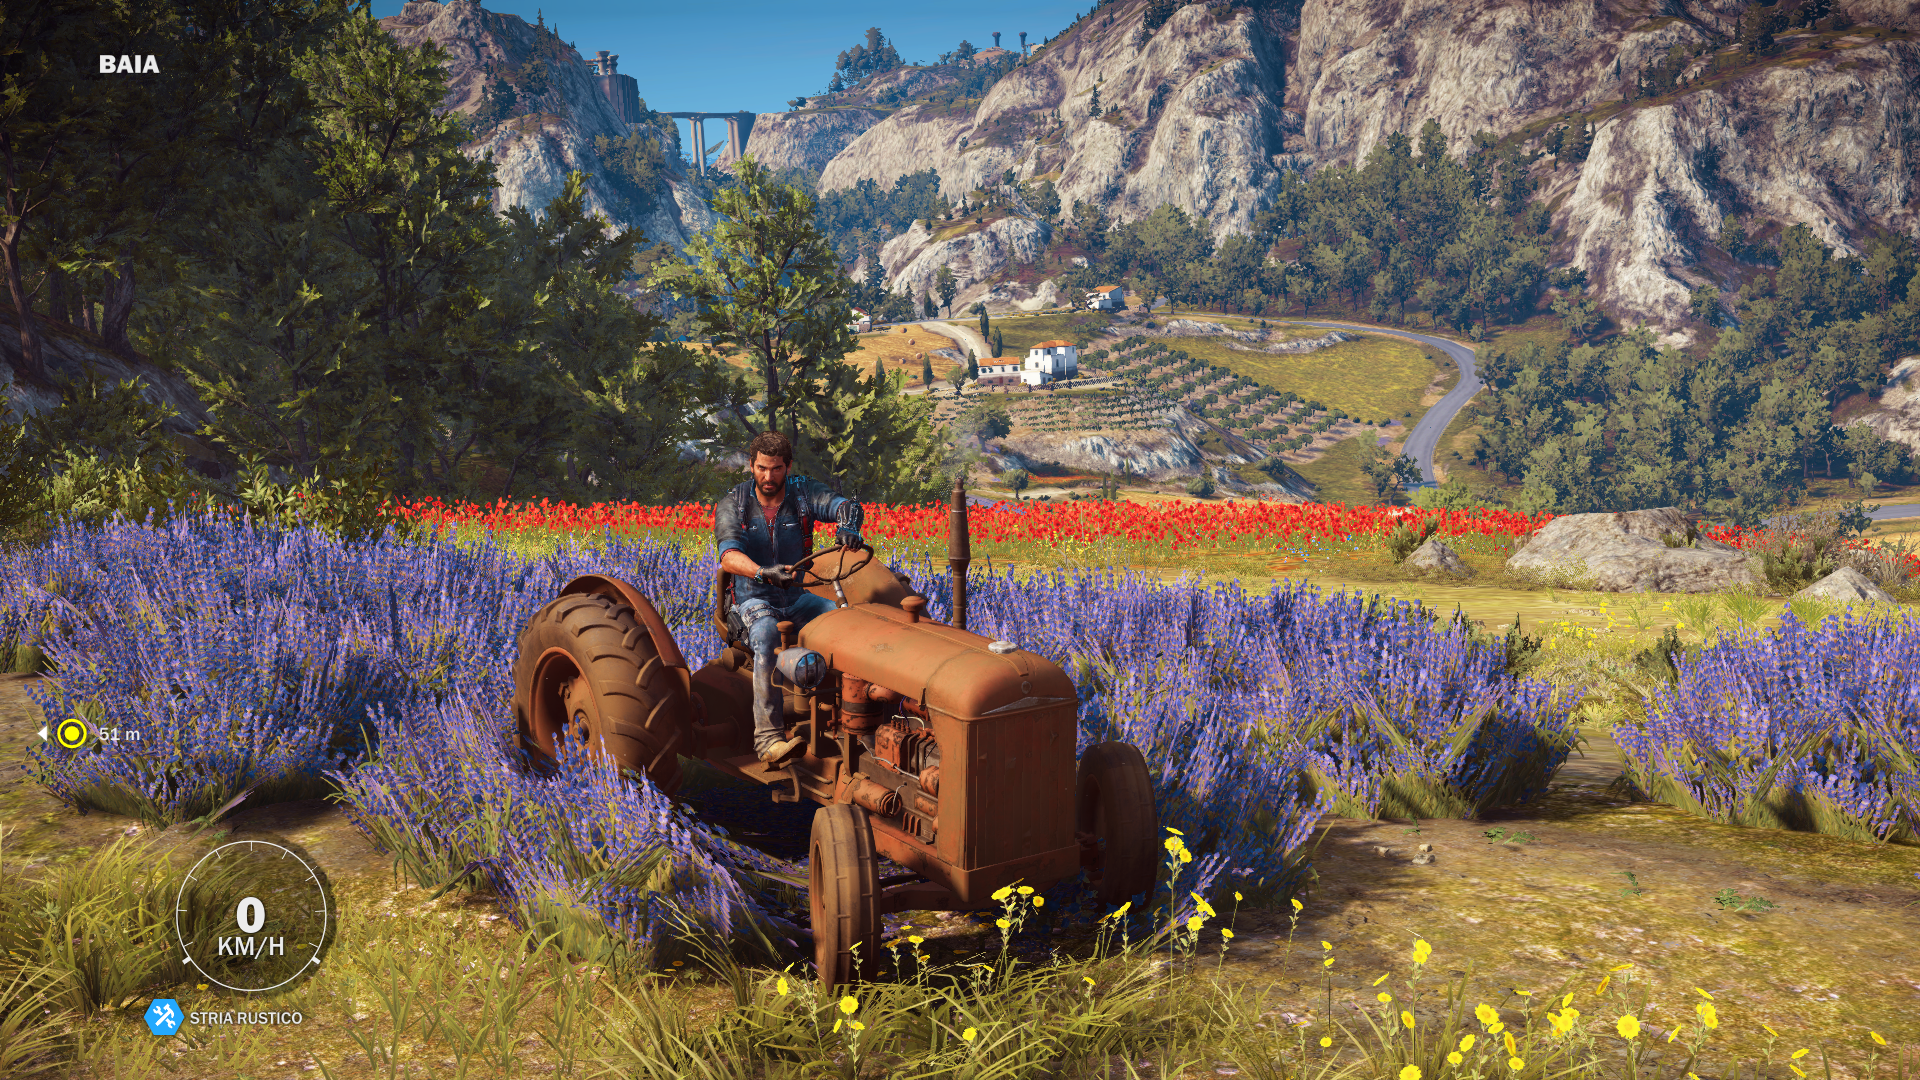 justcause3_2015120319xzsi0.png